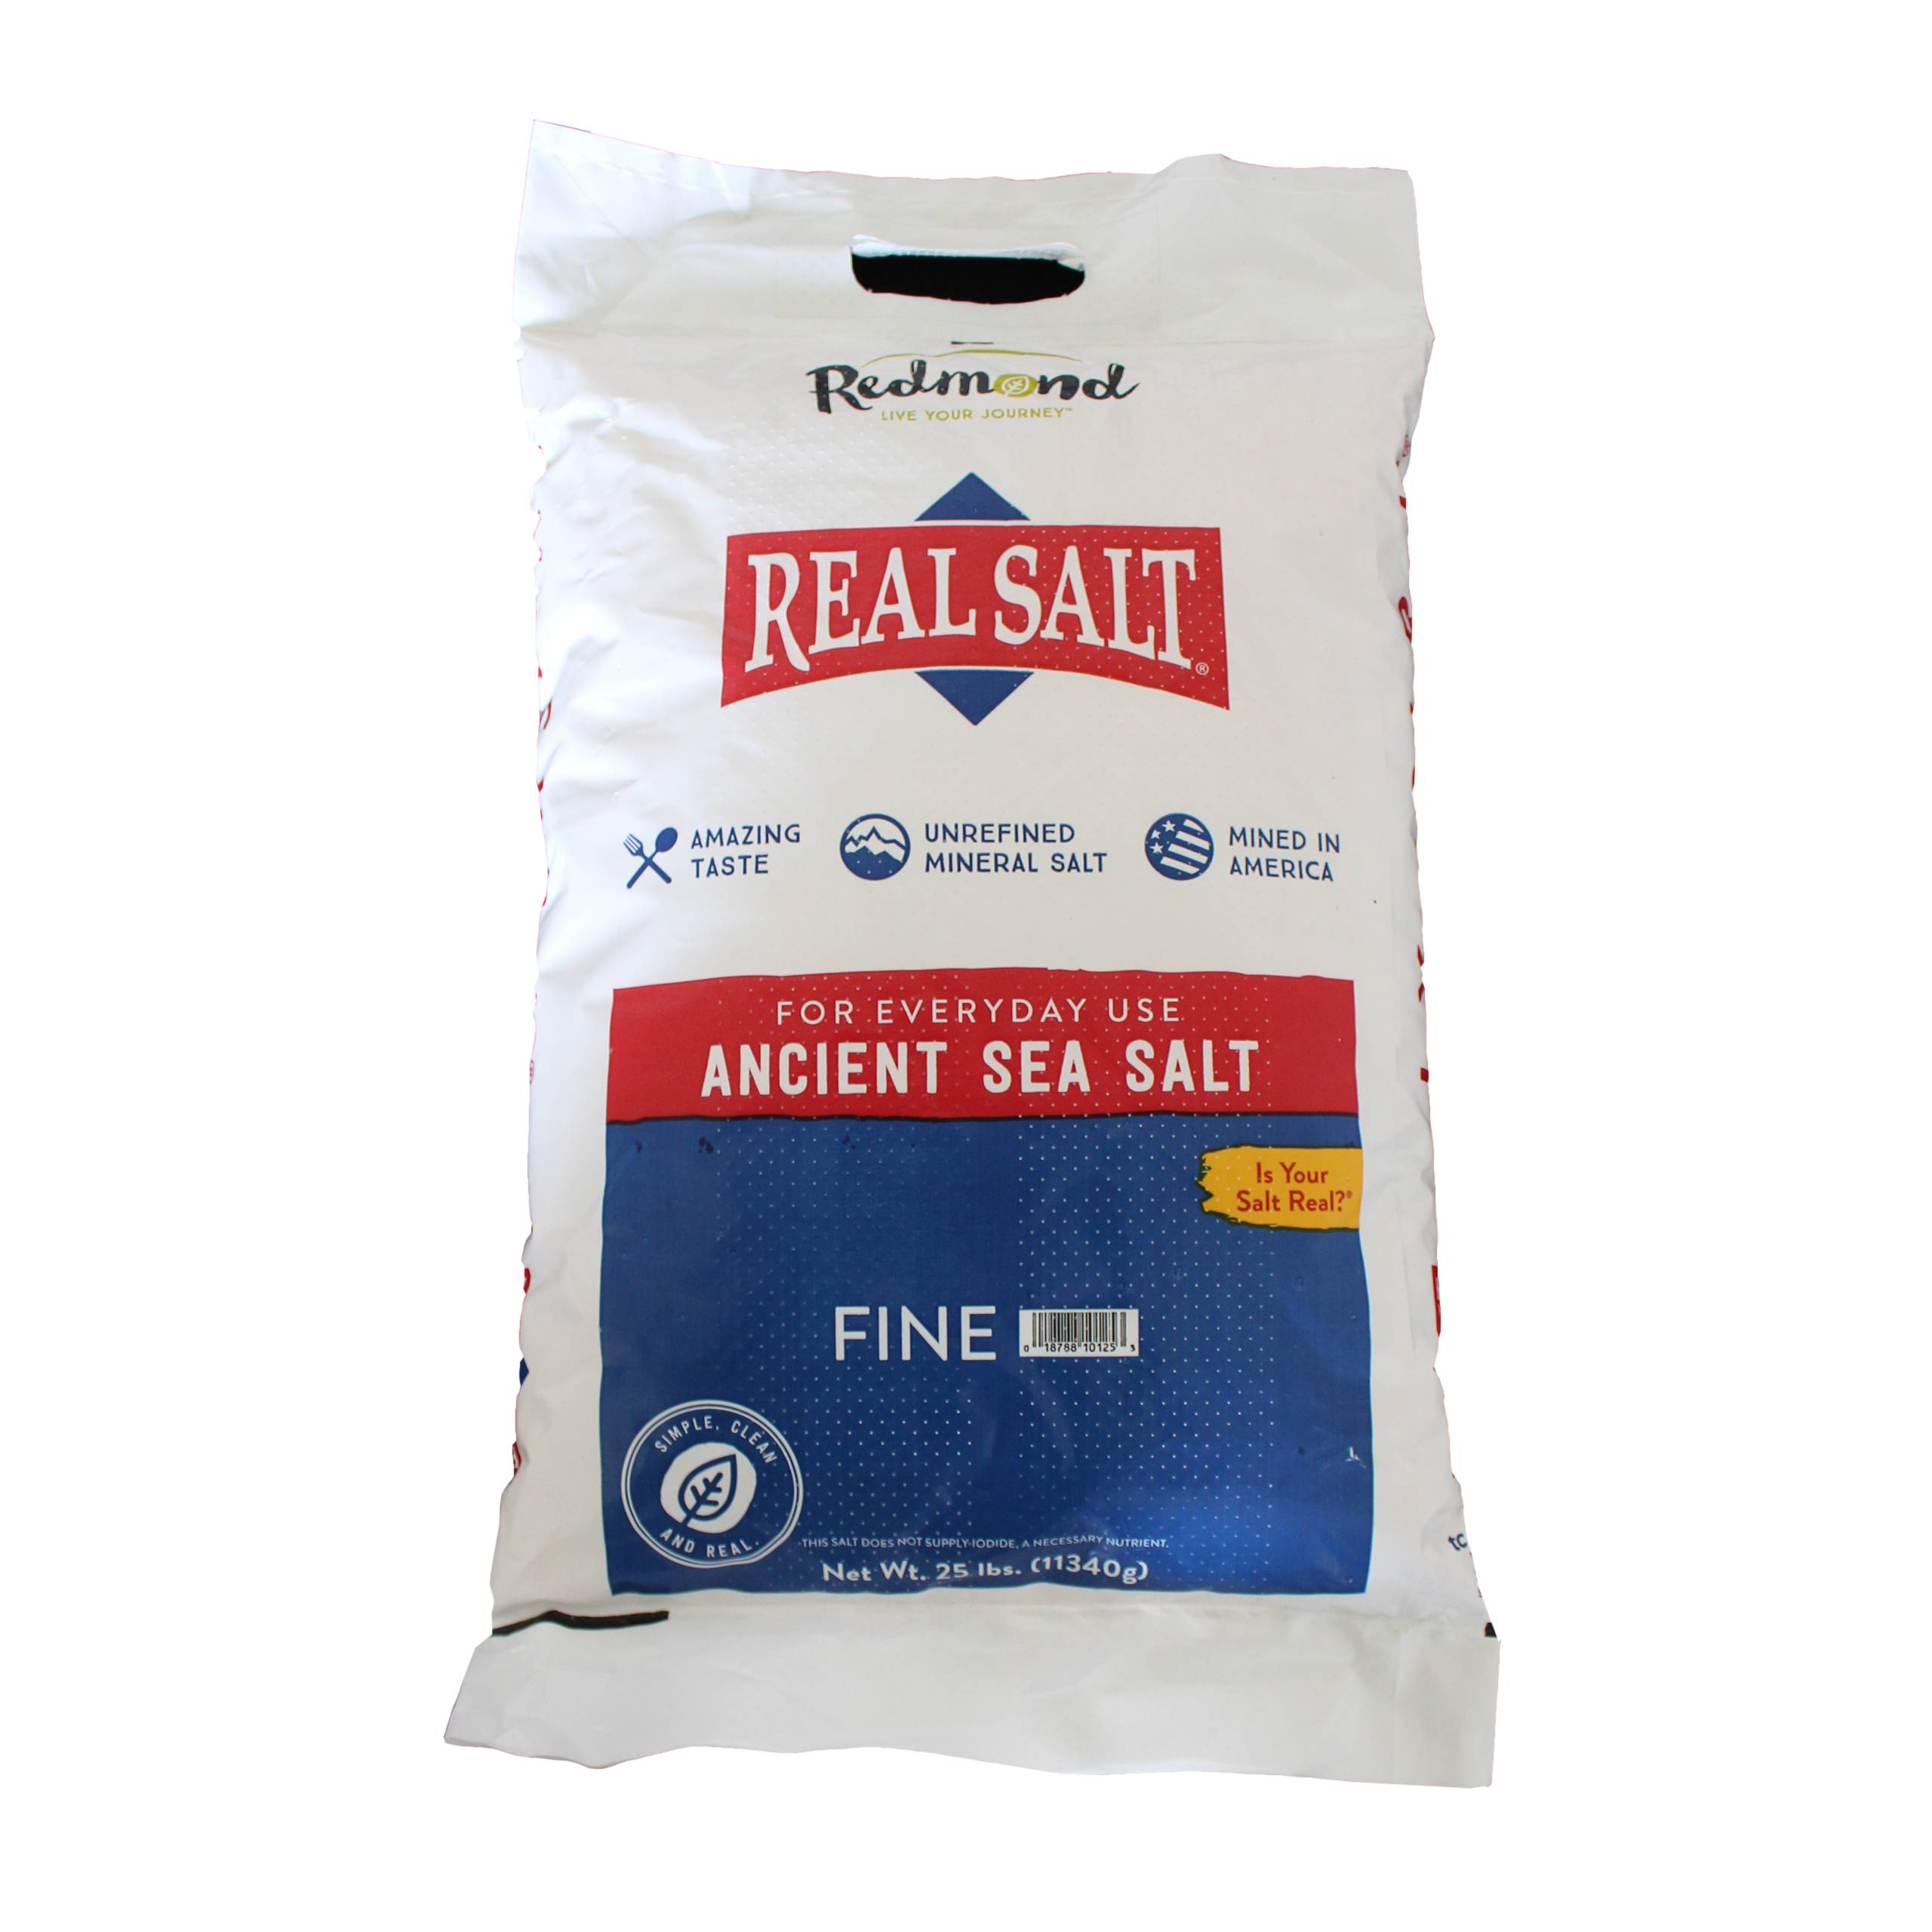 Rainy Day Foods Gluten-Free Non-GMO Real Salt 25 lbs Bag - 8099 Servings - (SHIPS IN 5-10 WEEKS) ancient sea salt fine.